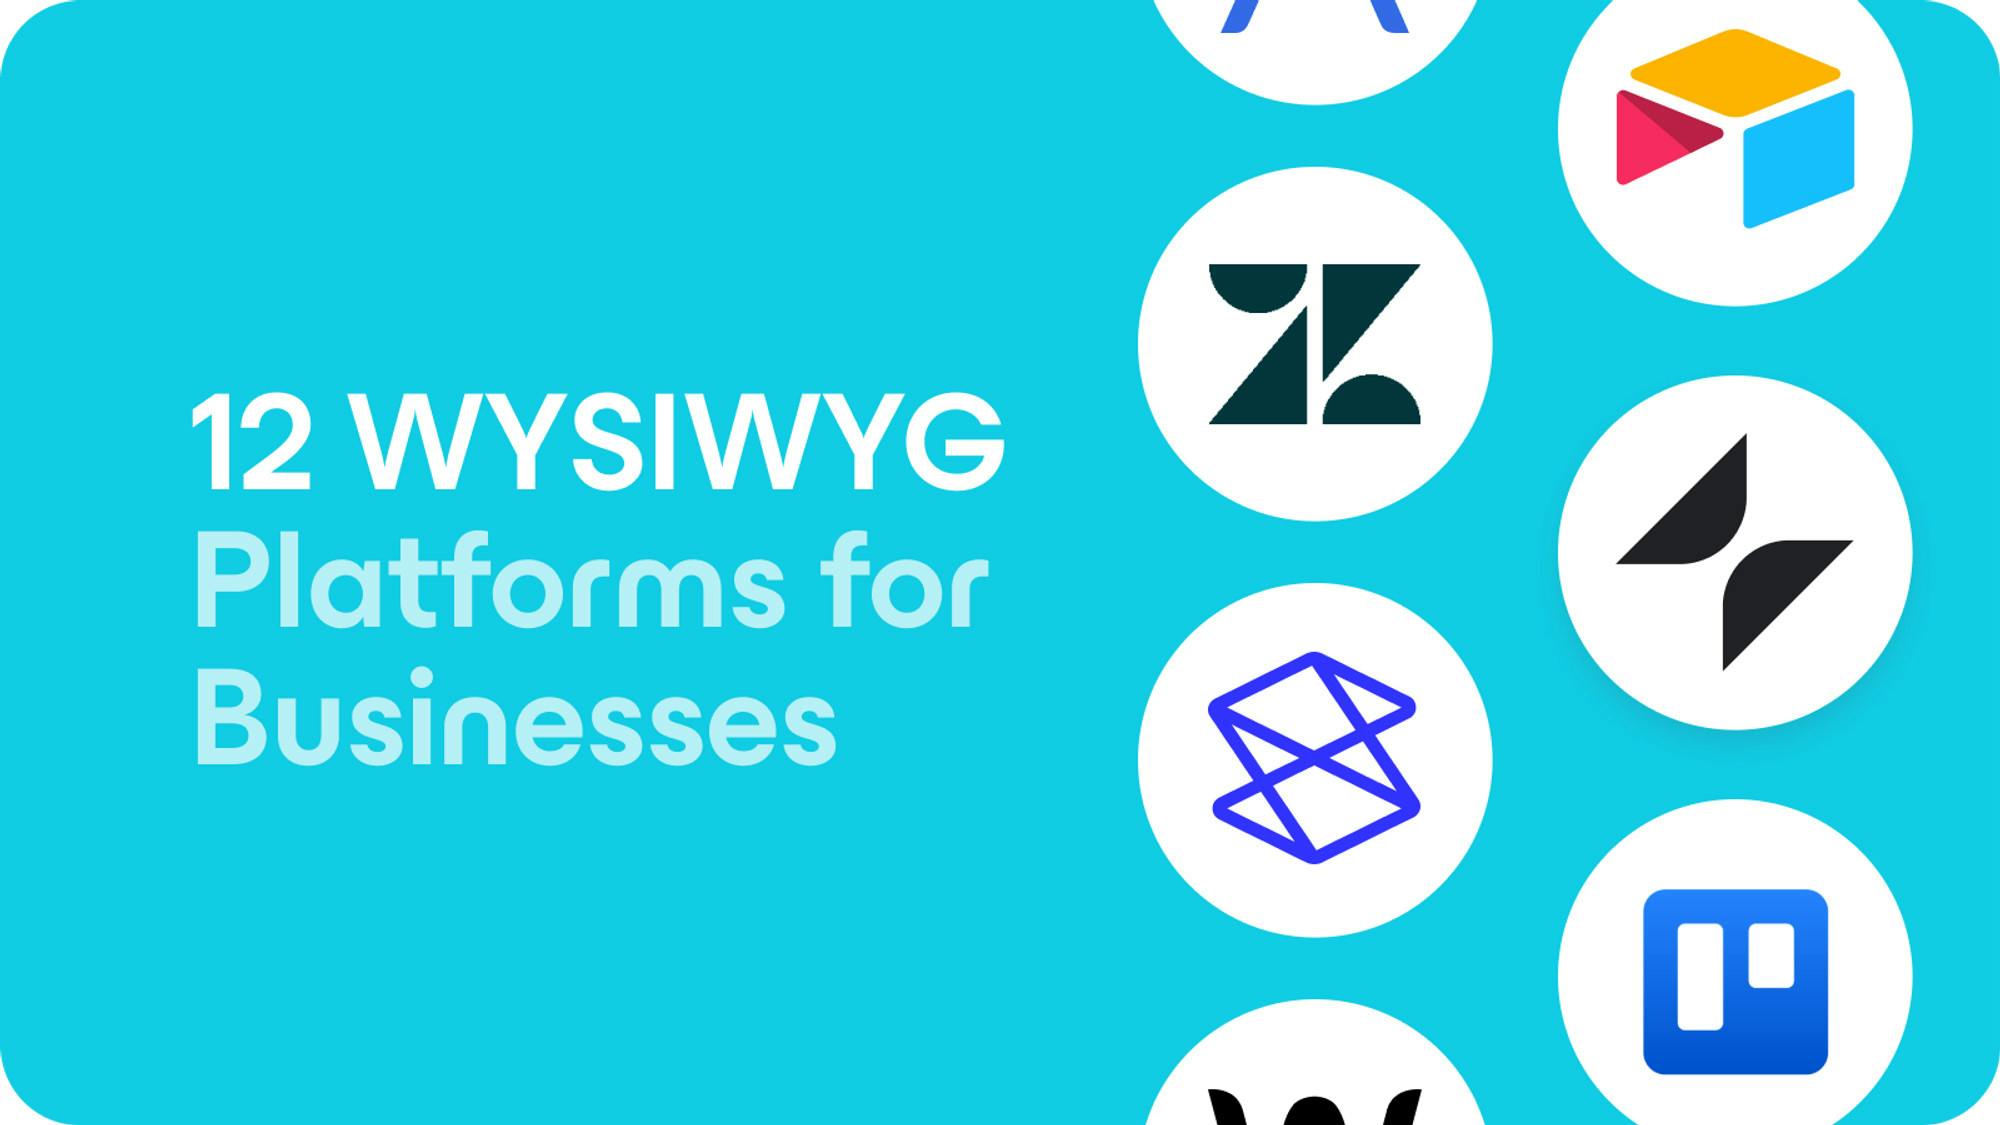 12 WYSIWYG Platforms for Businesses: Website Builders, E-Commerce Plugins, and More